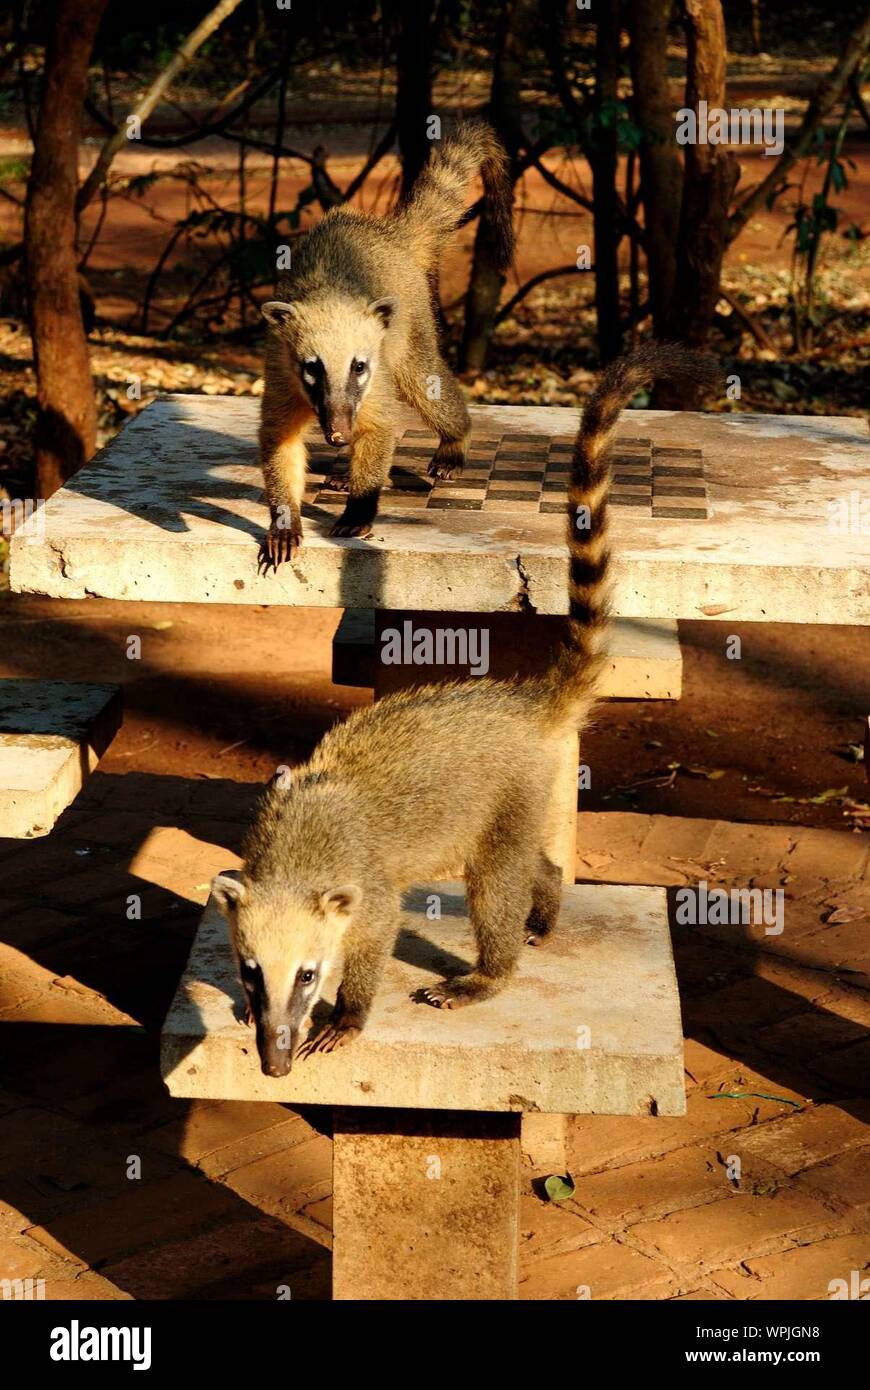 Two Coatis In The Park Stock Photo